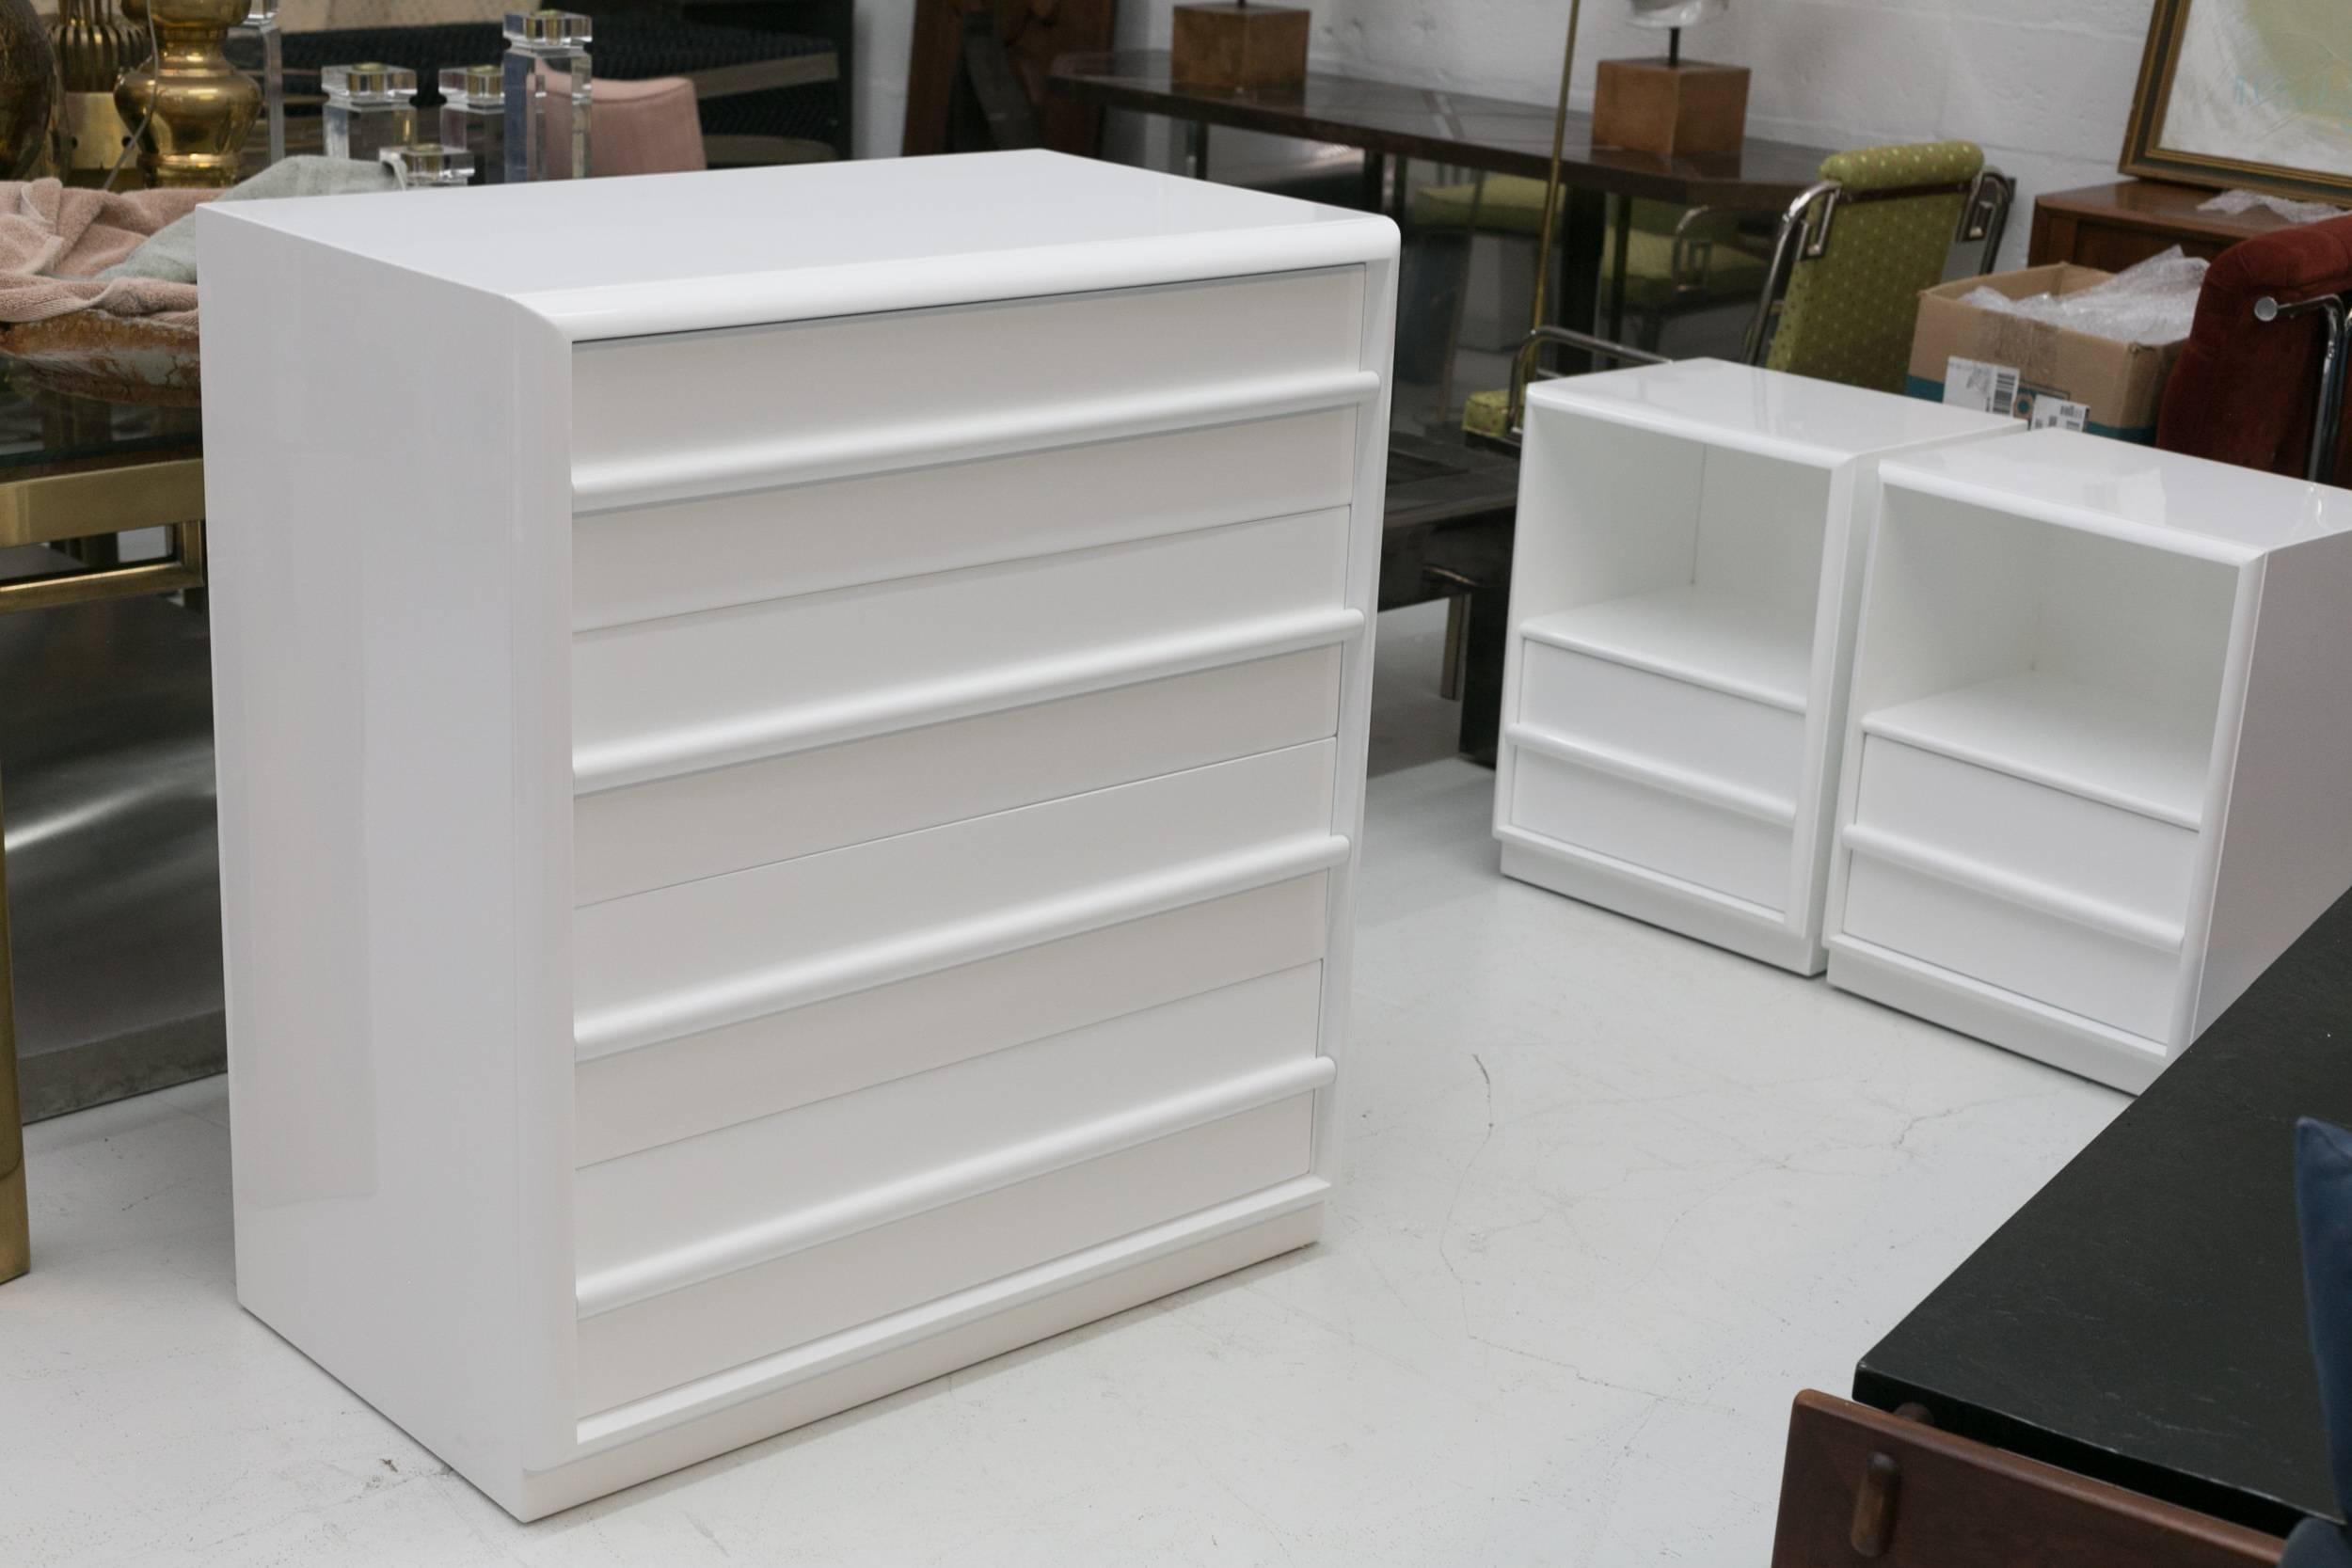 Five-drawer tall dresser by TH Robsjohn-Gibbings for Widdicomb.
Newly lacquered in bright white.
Part of four-piece bedroom suite.
